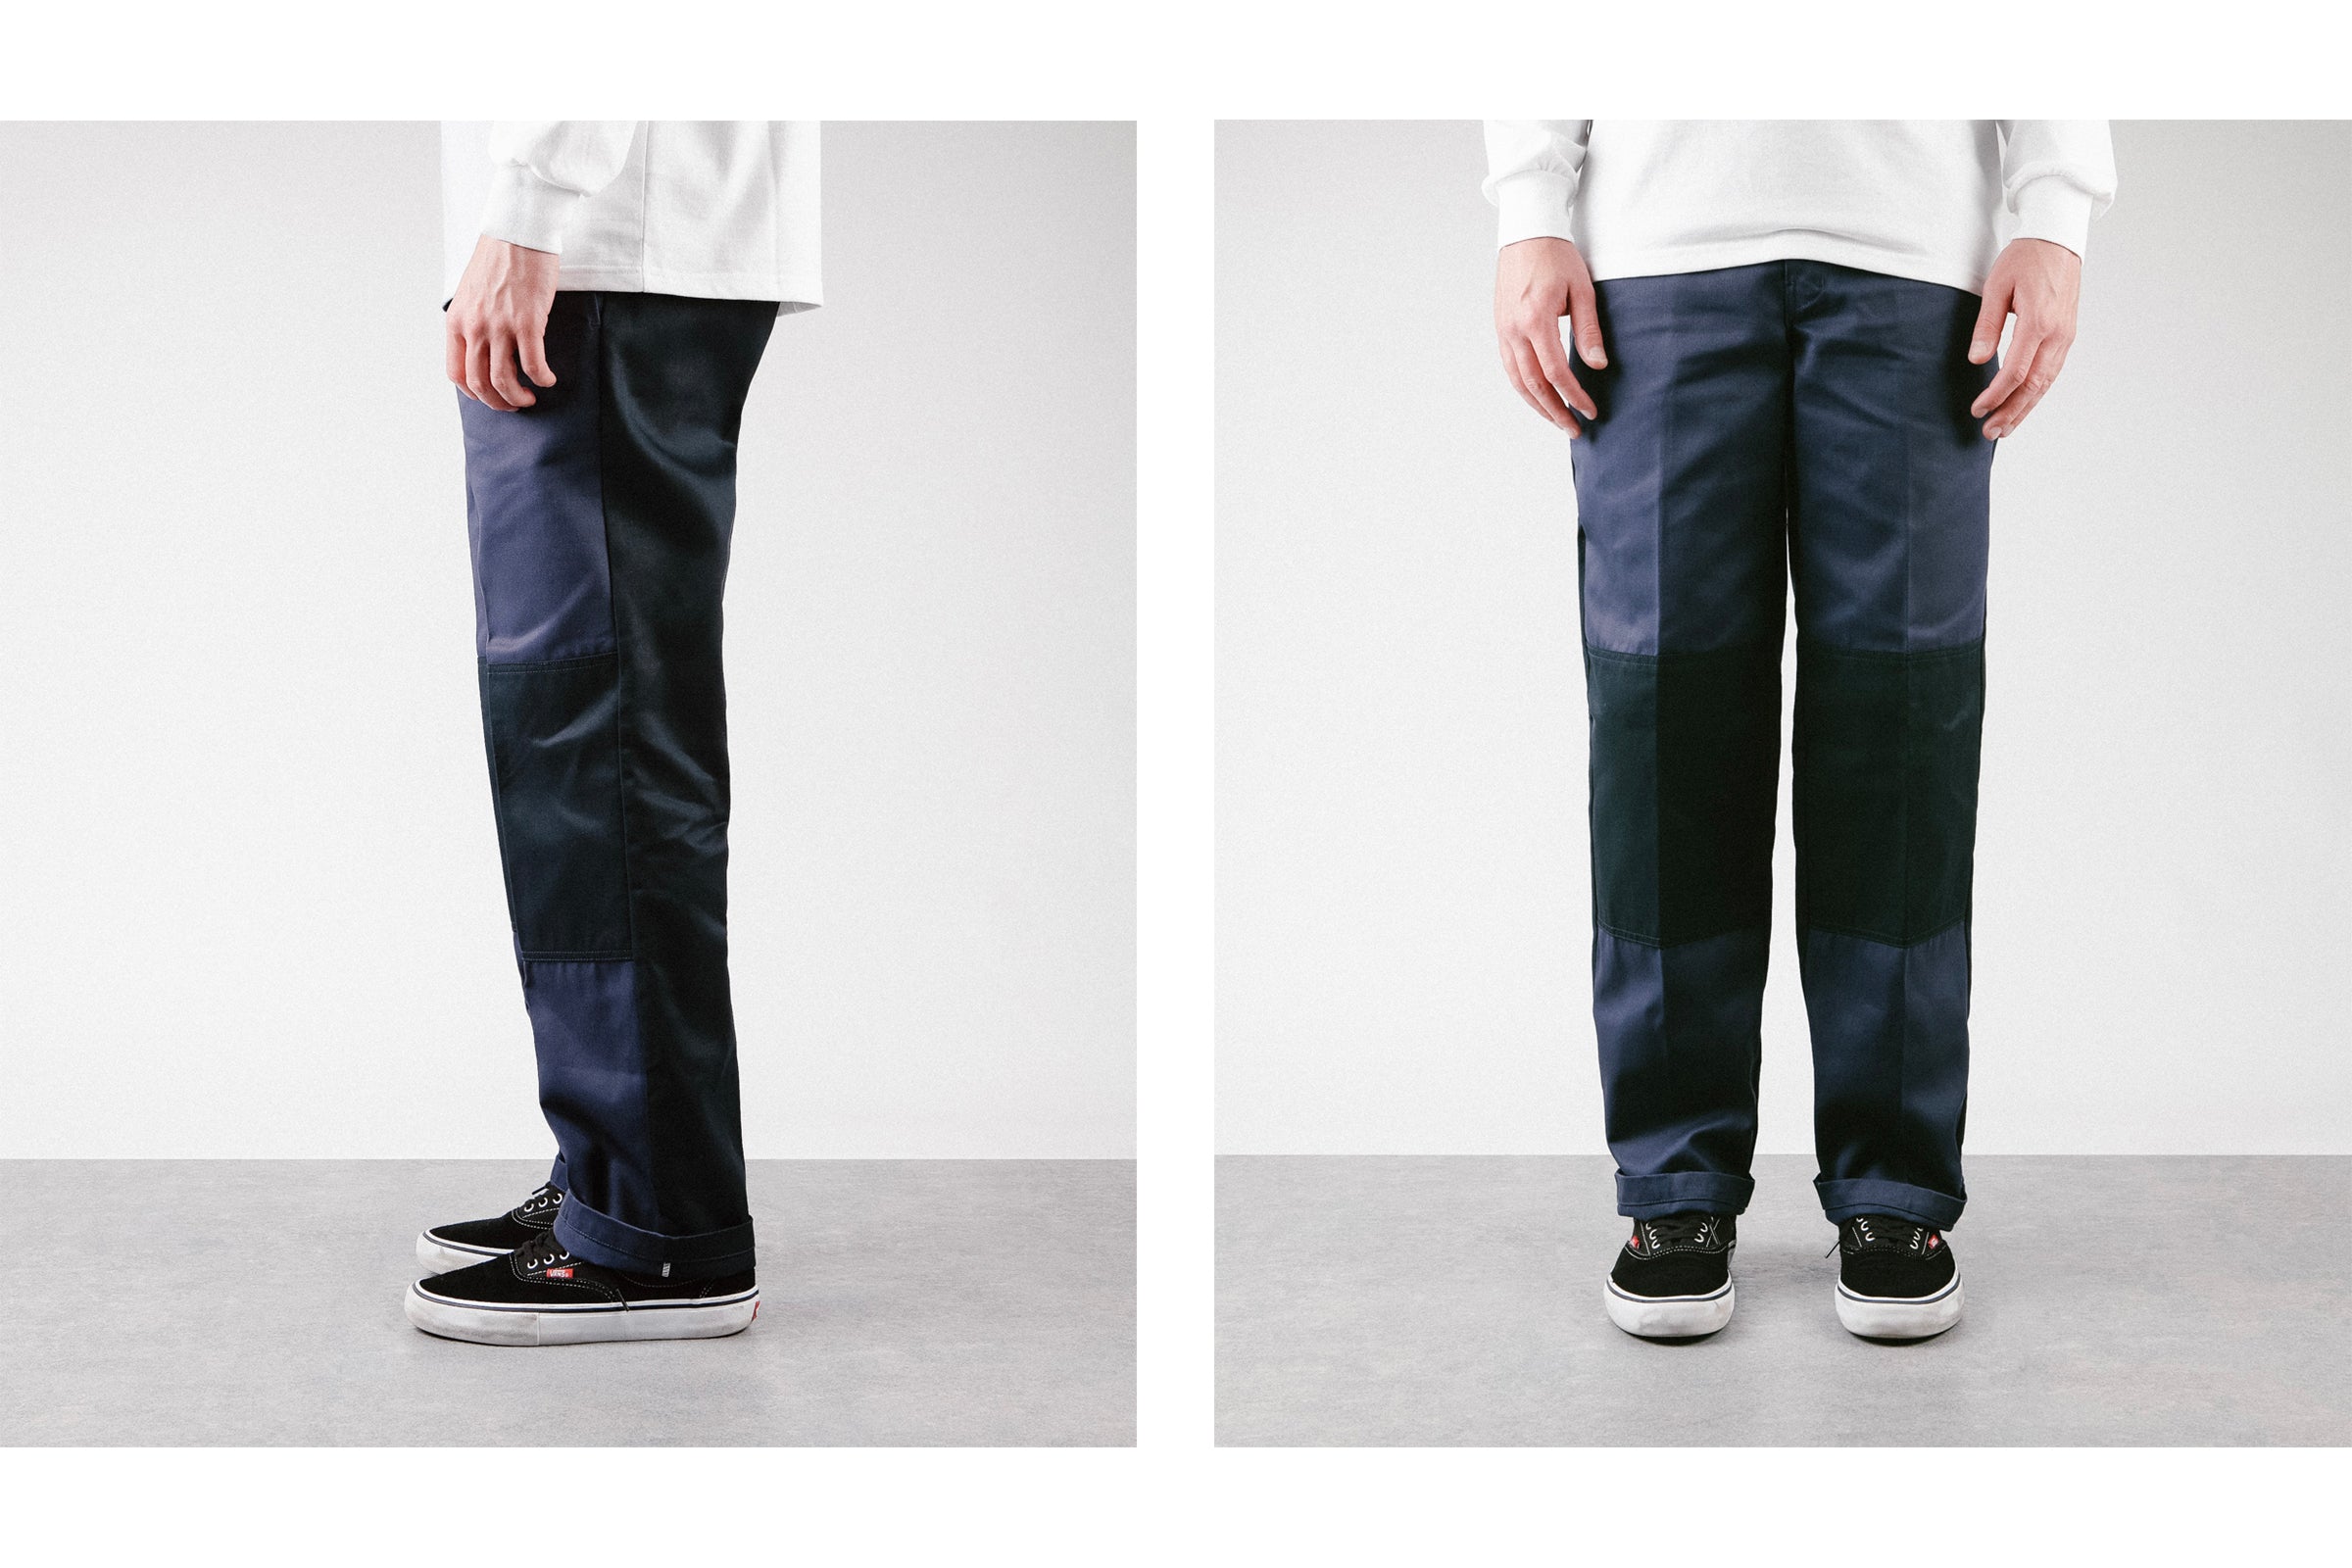 Dickies Work Pants Fit Guide 2023  How to Style Them 874 873 872   Urban Industry